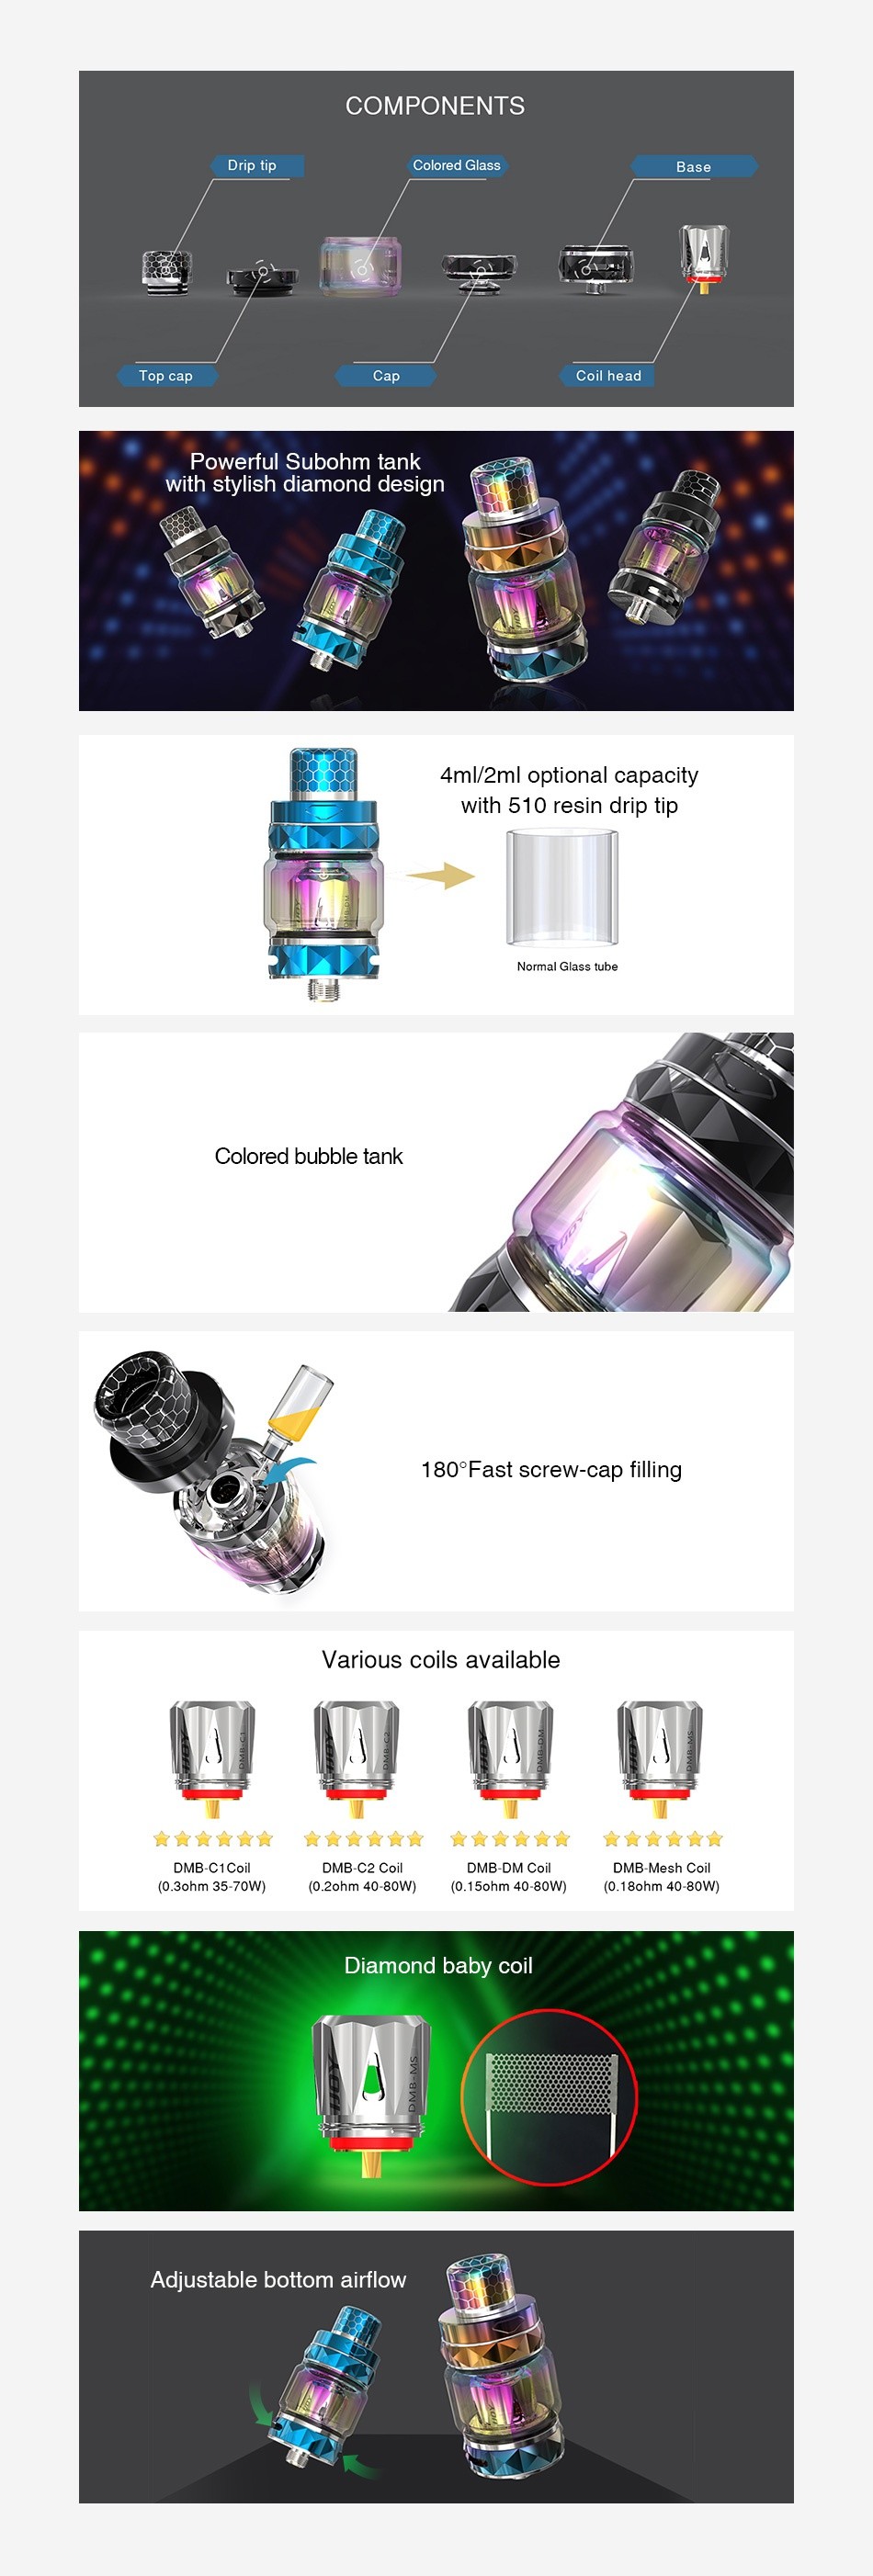 IJOY Diamond Baby Subohm Tank 4ml COMPONENTS Colored glat Powerful subohm tank with stylish diamond design 4ml 2ml optional capacit with 510 resin drip tip Colored bubble tank 180Fast screw cap filling Various coils available                          DMB CIC DMB DM DMB Mesh Co 03om3570W 4C8CW 0 15om4080W  0 1ahm4380w  Diamond baby coil Adjustable bottom airflow